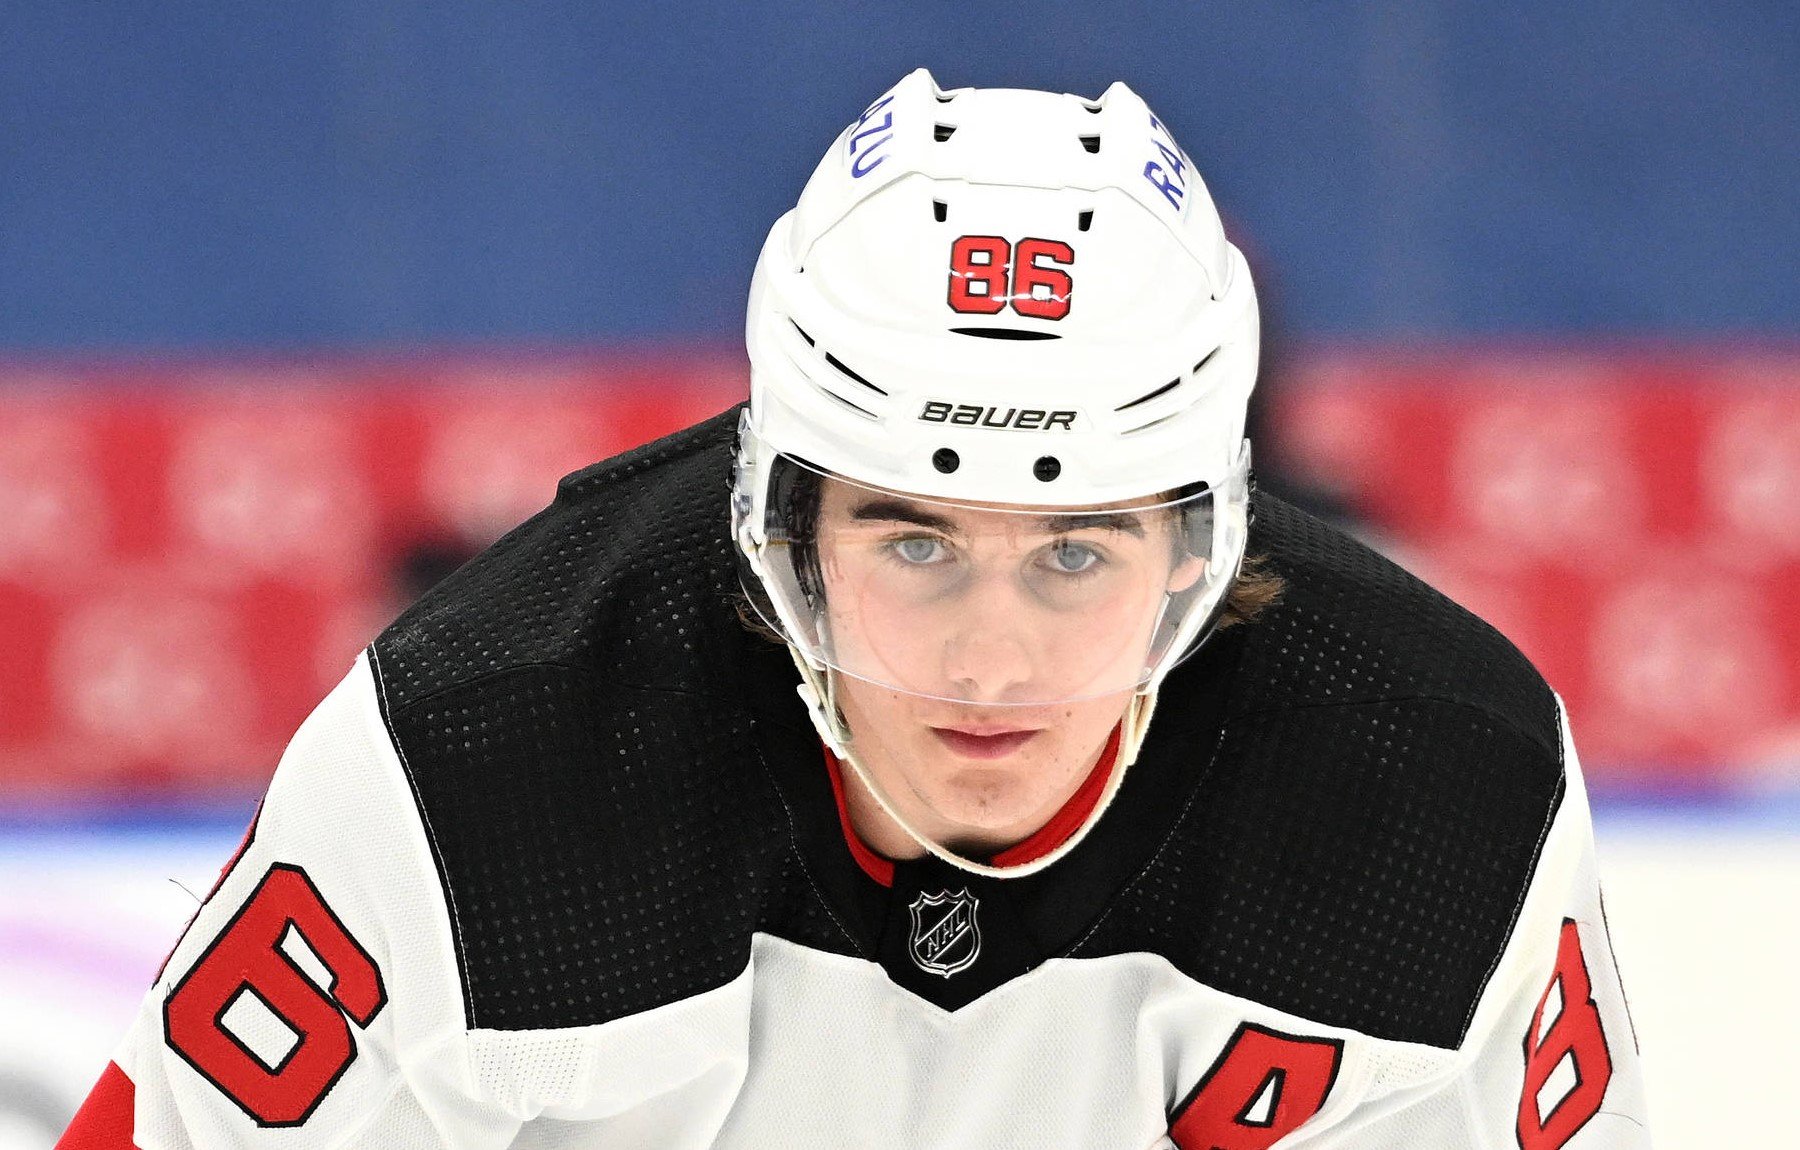 A chip on his shoulder': Jack Hughes' long offseason transforming his game  - The Athletic